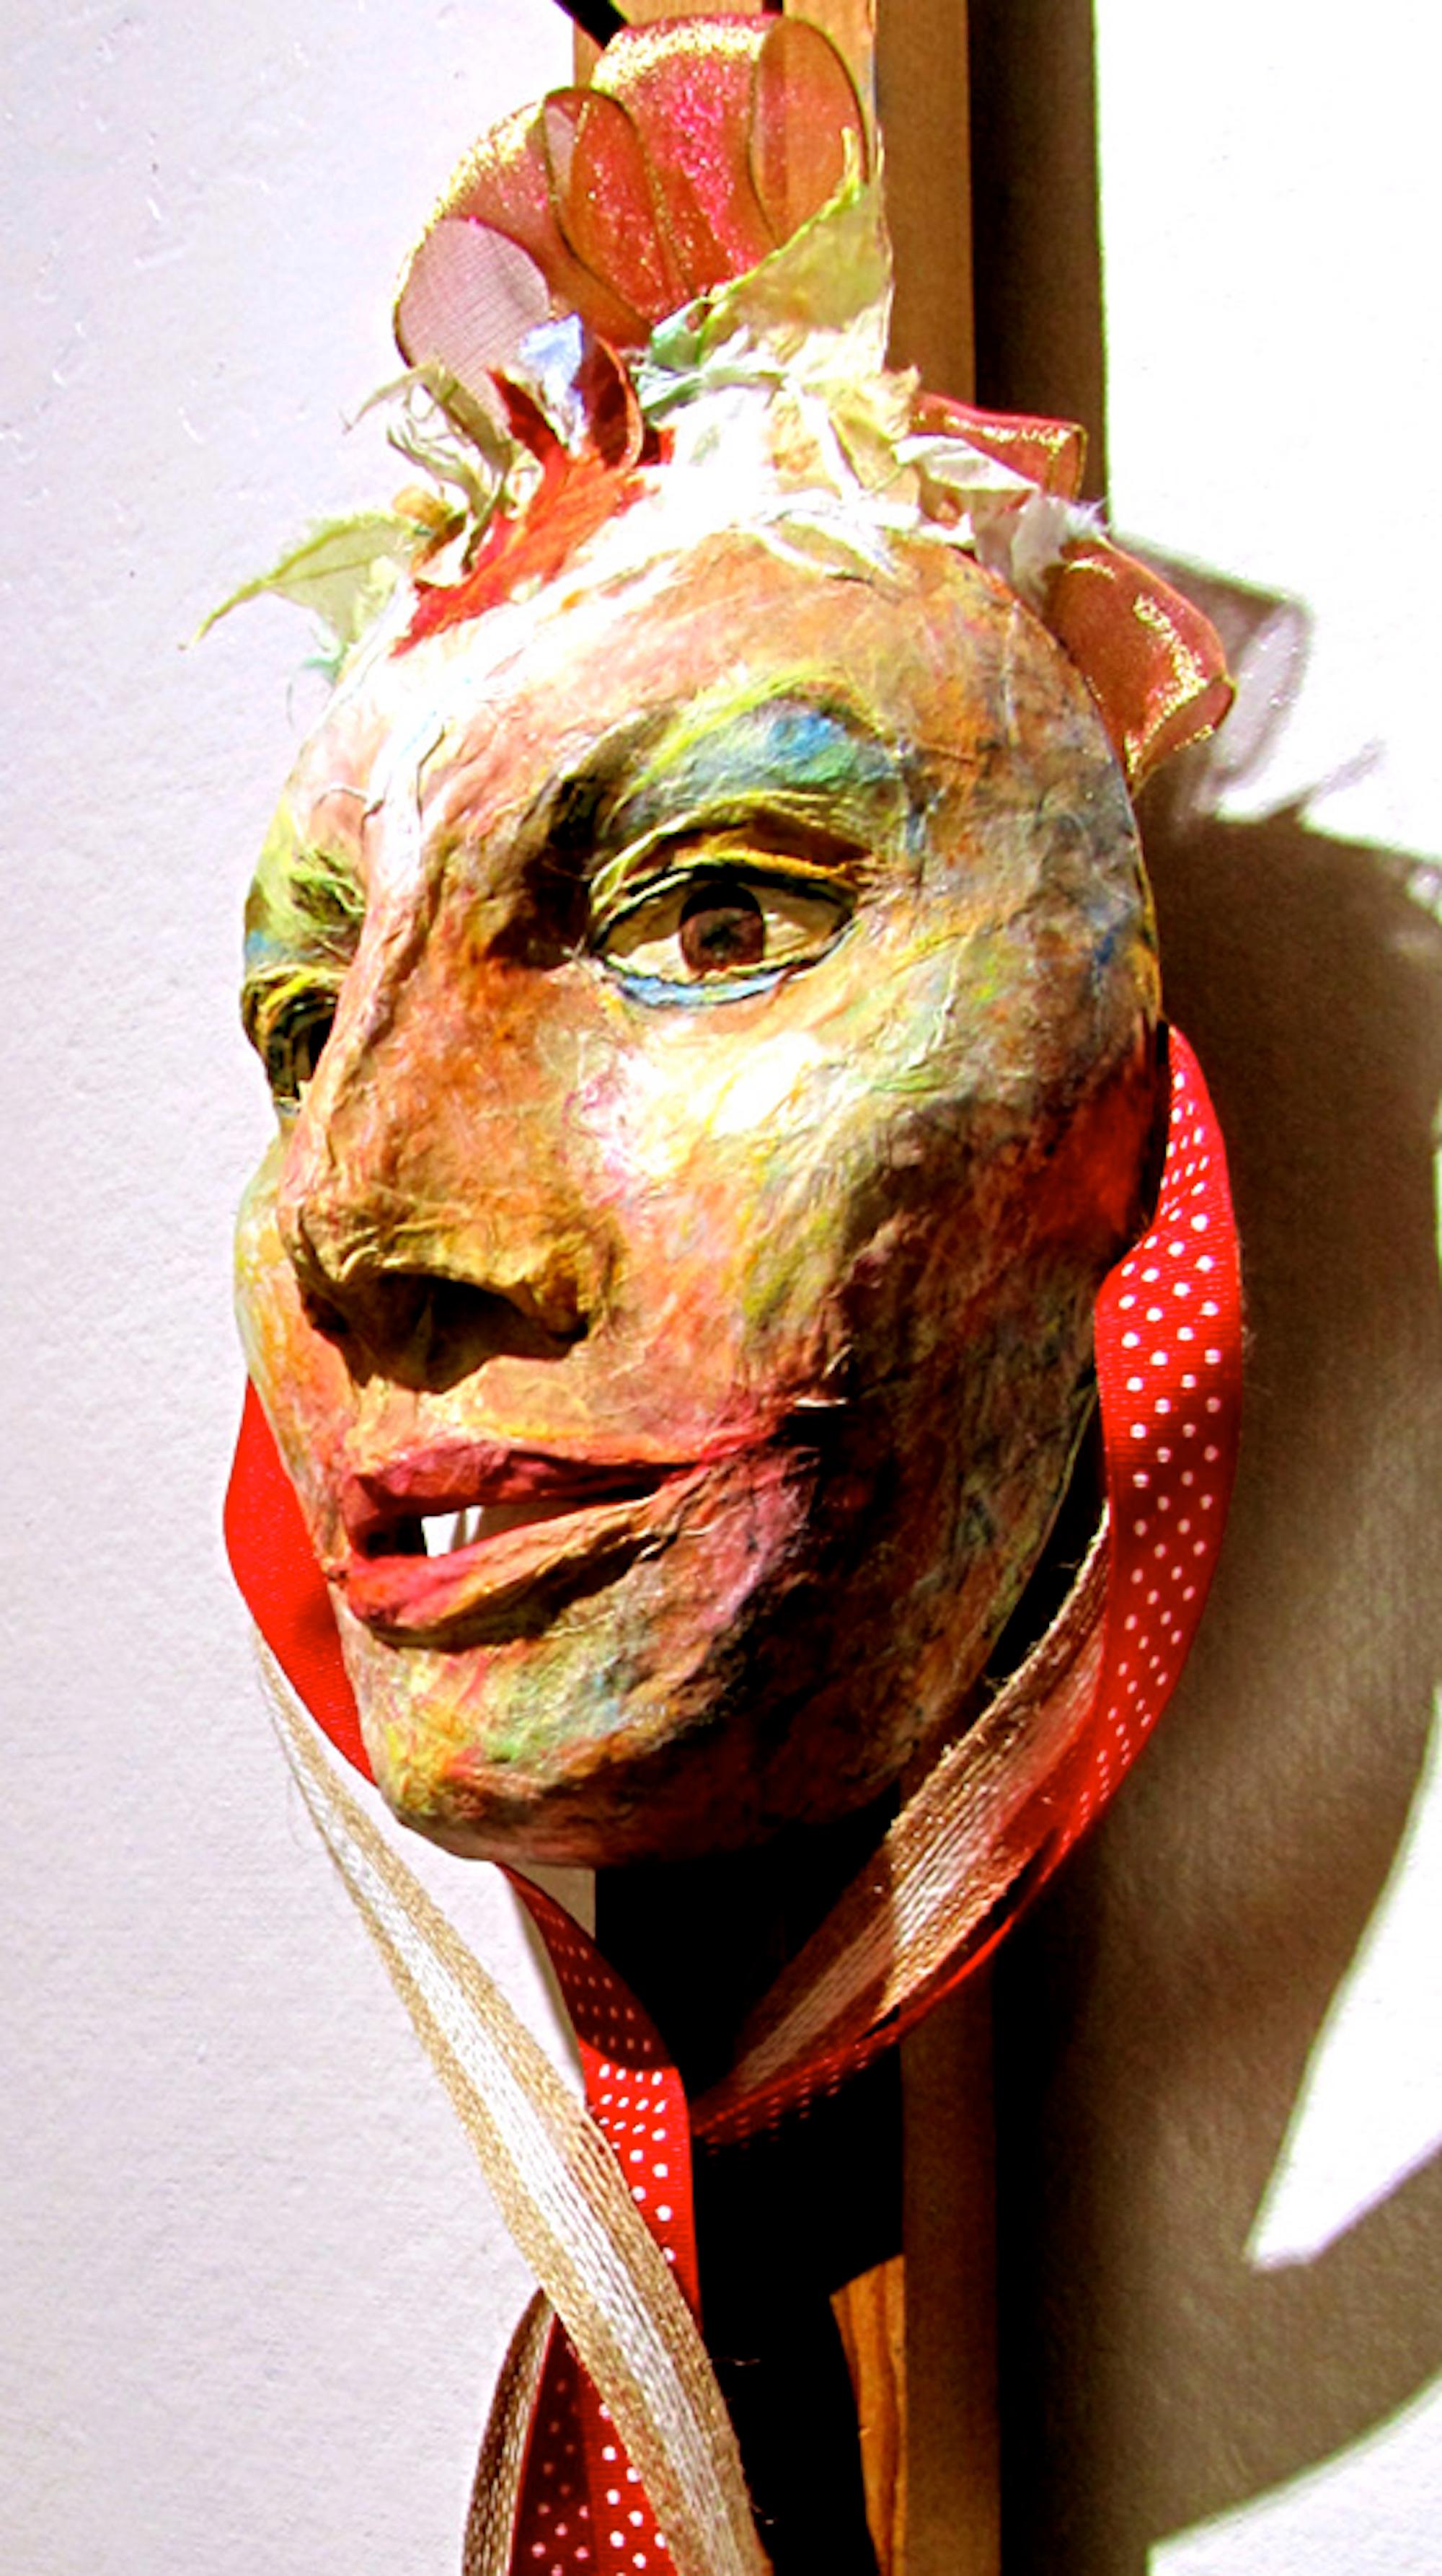 Mixed Media Mask -- Dahlia's Sister - Beige Figurative Sculpture by Phyllis Tracy Malinow